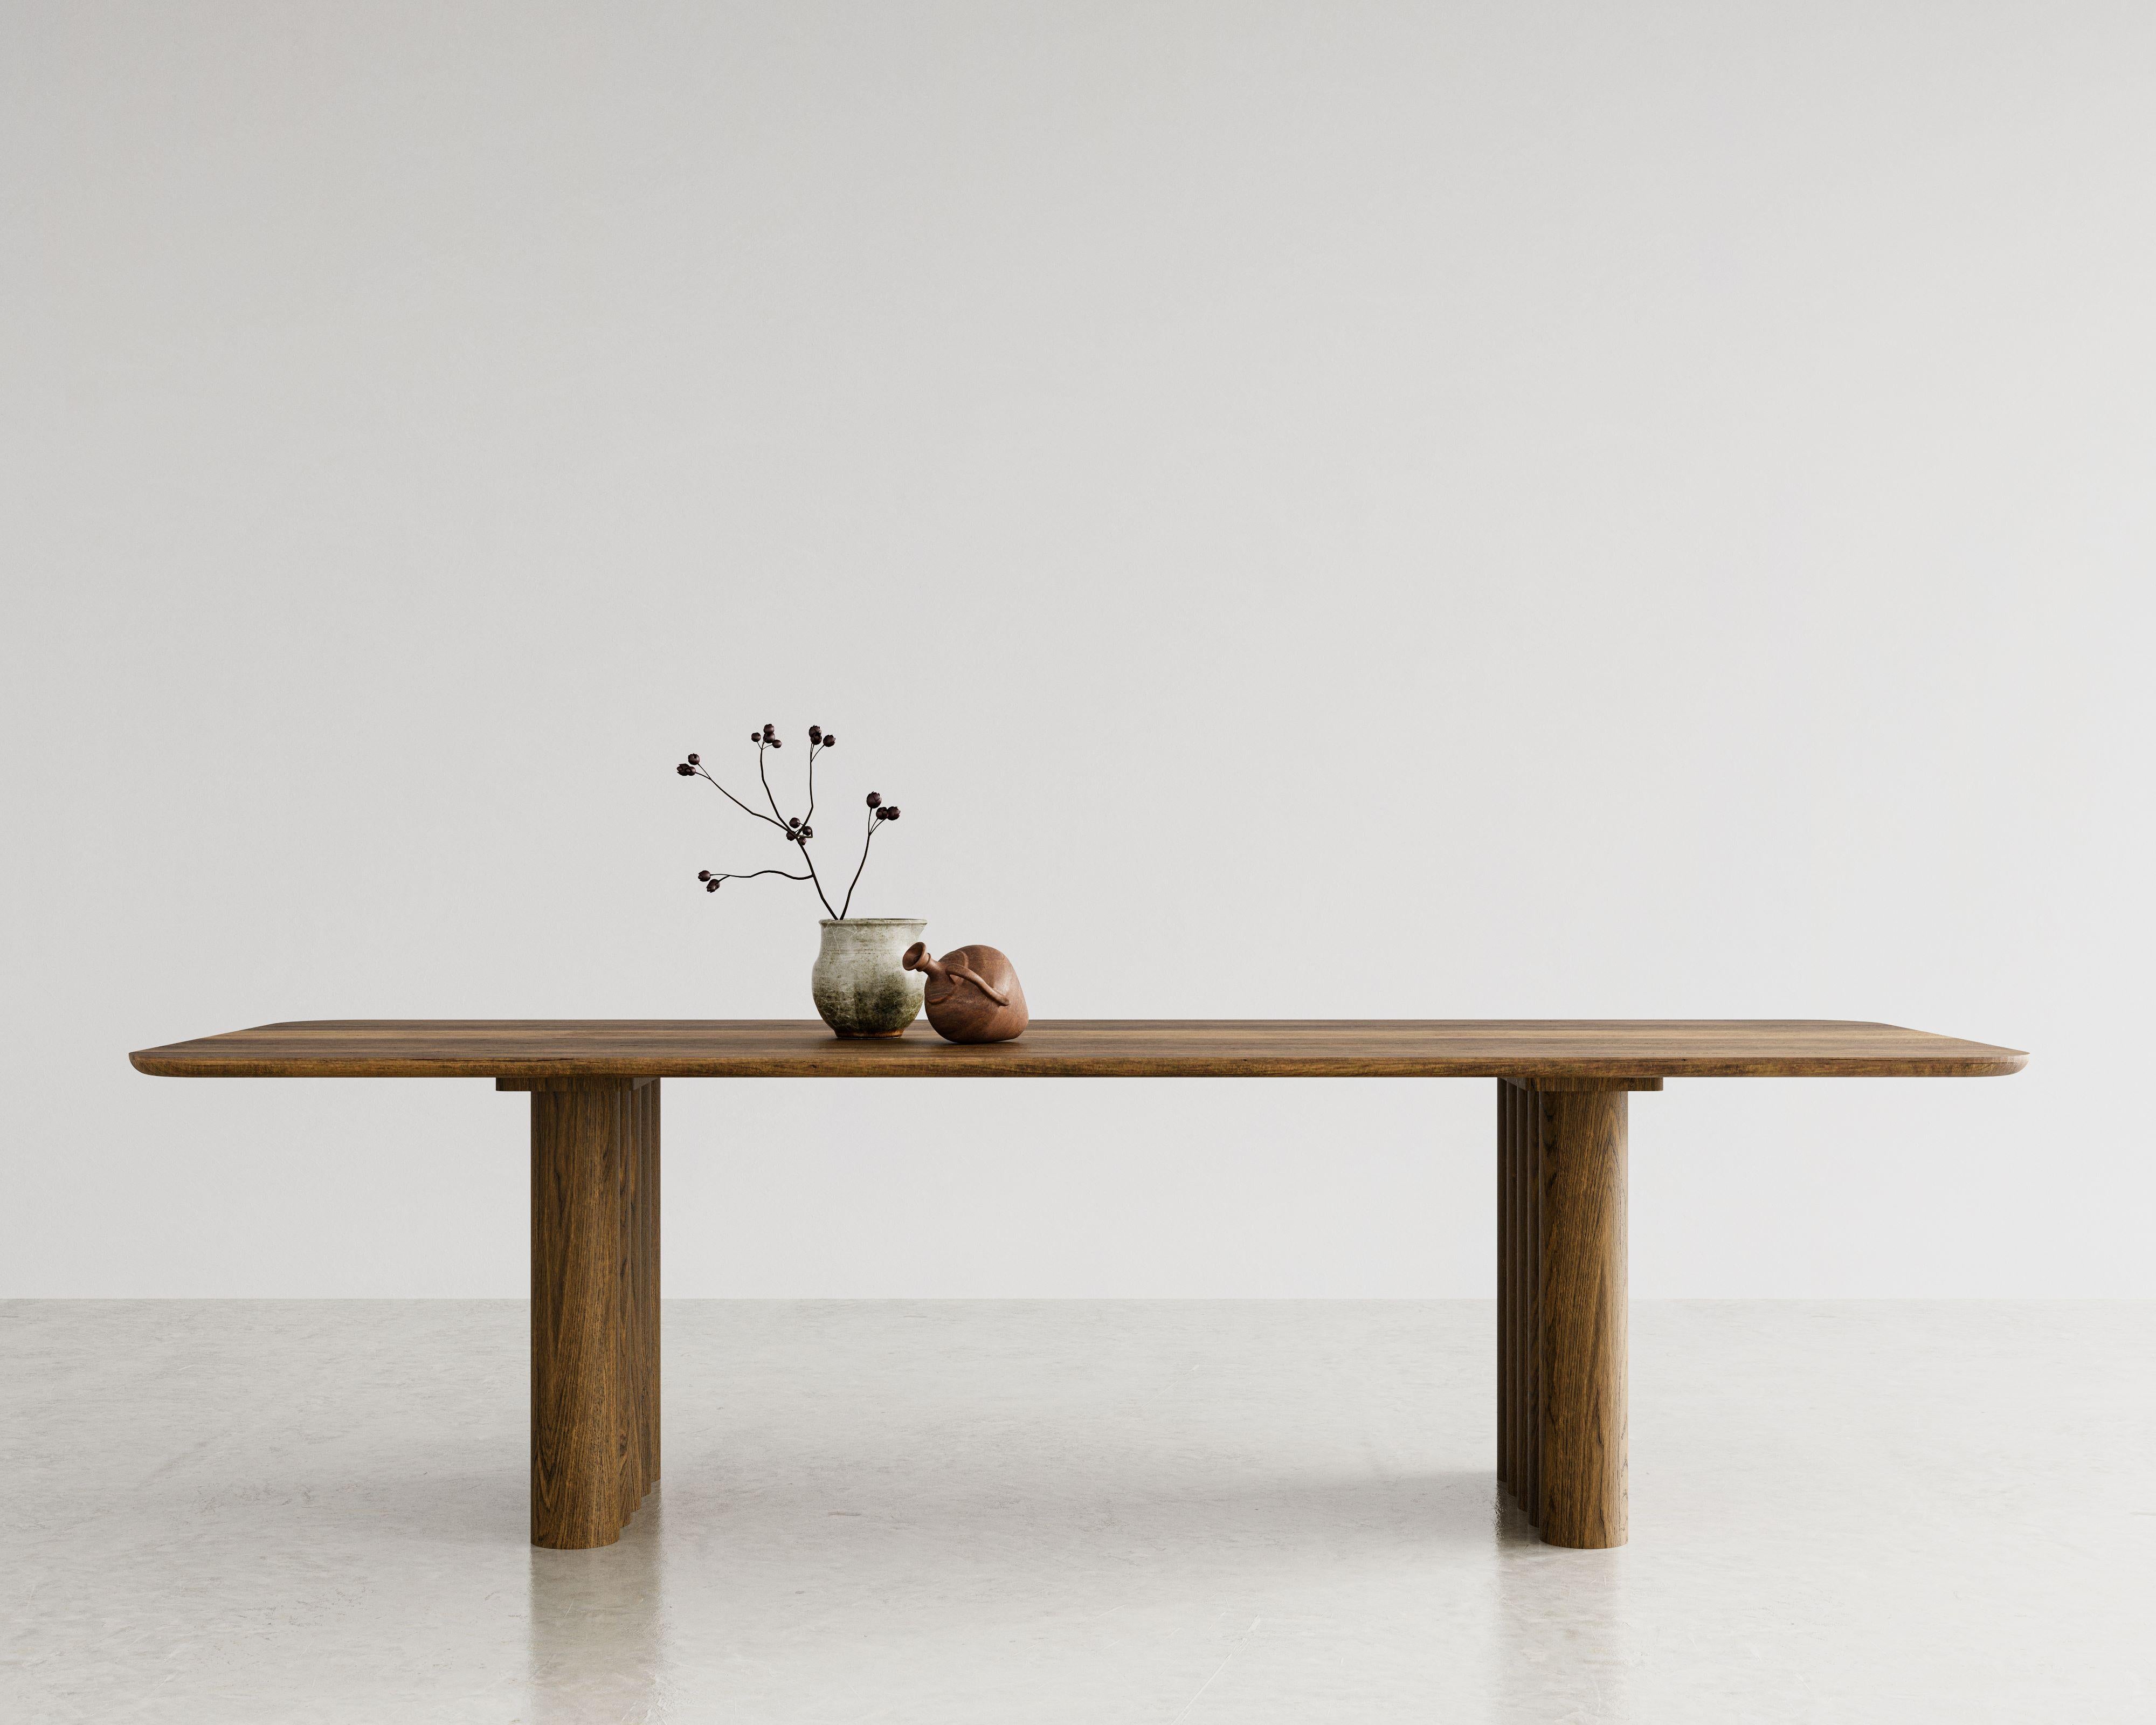 PLUSH dining table, rectangular, 300 cm.
Solid wood table top and legs. Handmade in Denmark. 
Signed by Jacob Plejdrup for DK3

Table's height: 72 or 74 cm
Sold model: 
Smoked Oak
Legs Thickness: 130 mm
Table top Thickness: 30 mm

Table top’s